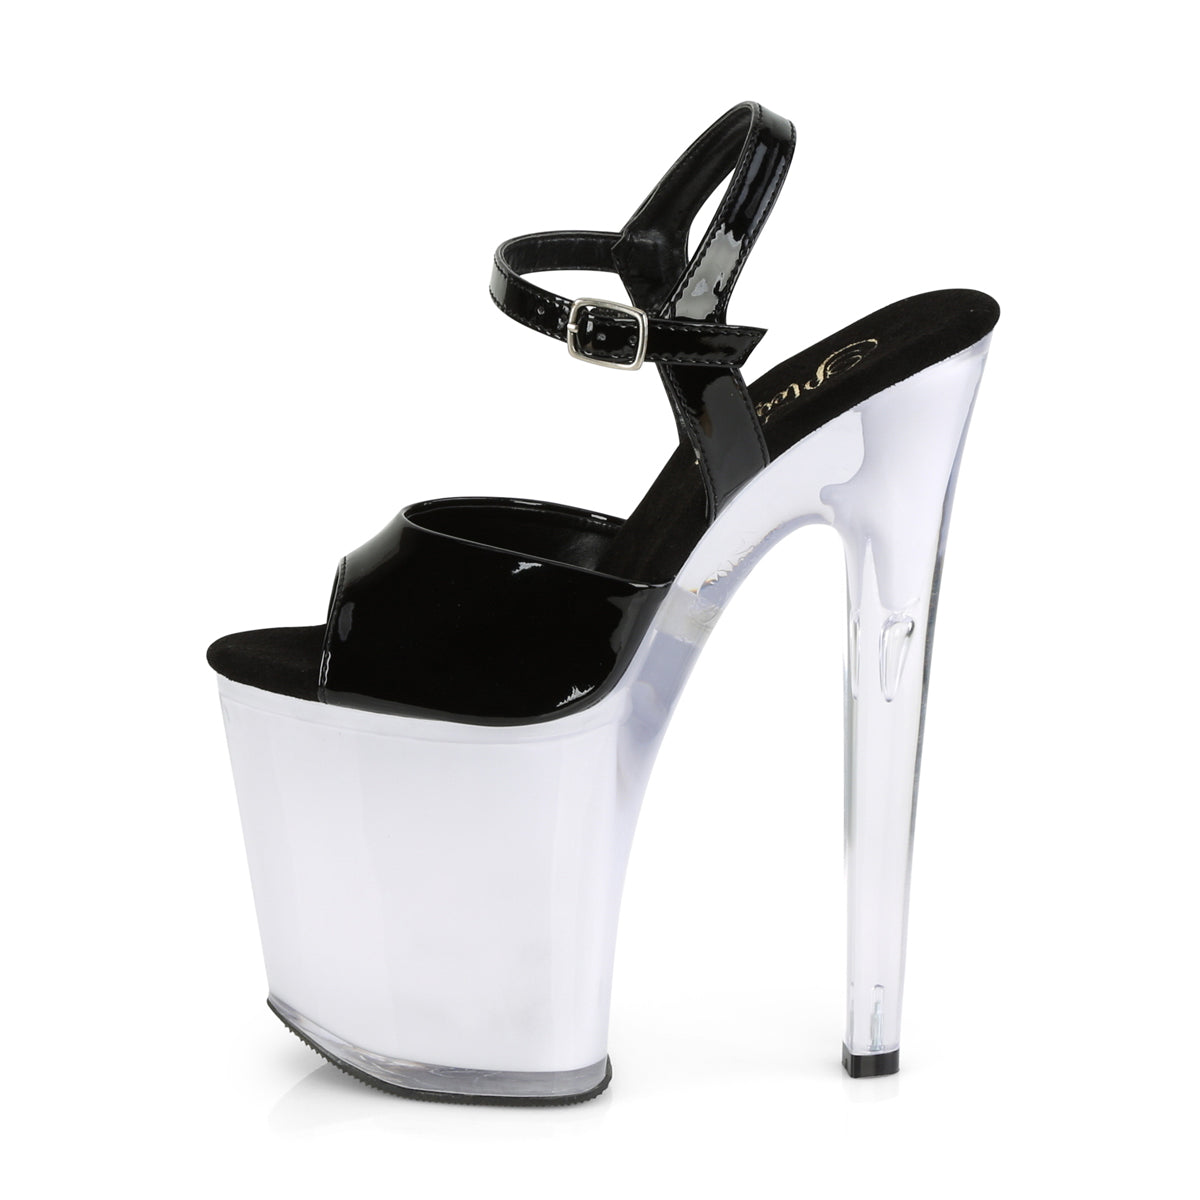 DISCOLITE-809 8" Black and White Glow Pole Dancer Platforms-Pleaser- Sexy Shoes Pole Dance Heels